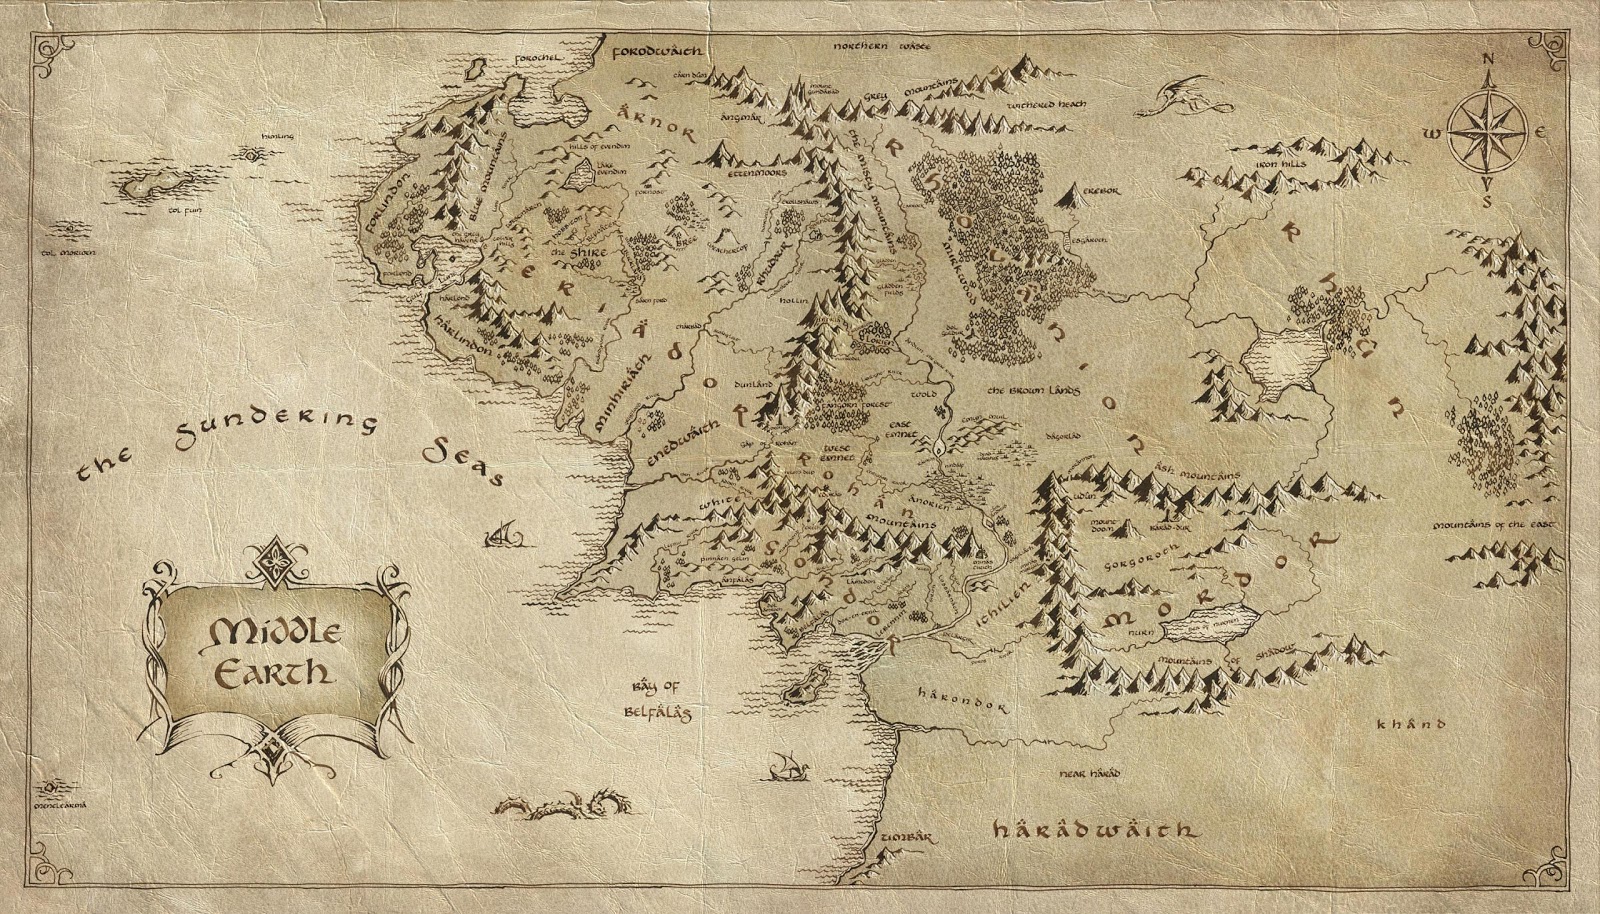 map to show the expanse of Middle Earth